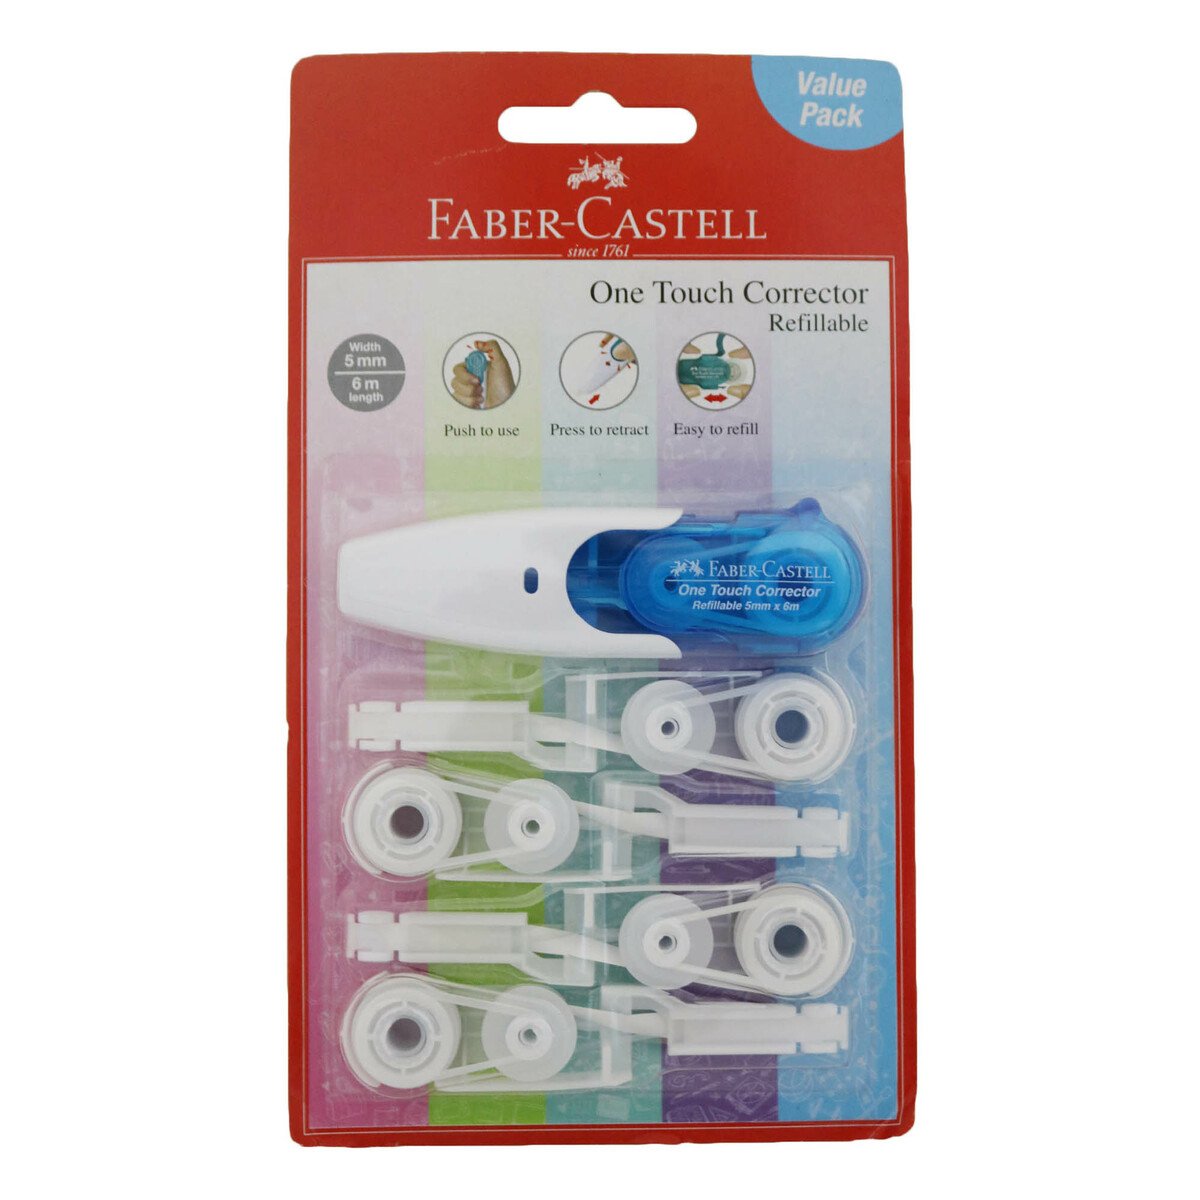 Faber Castell One Touch Corrector + 4 Refill